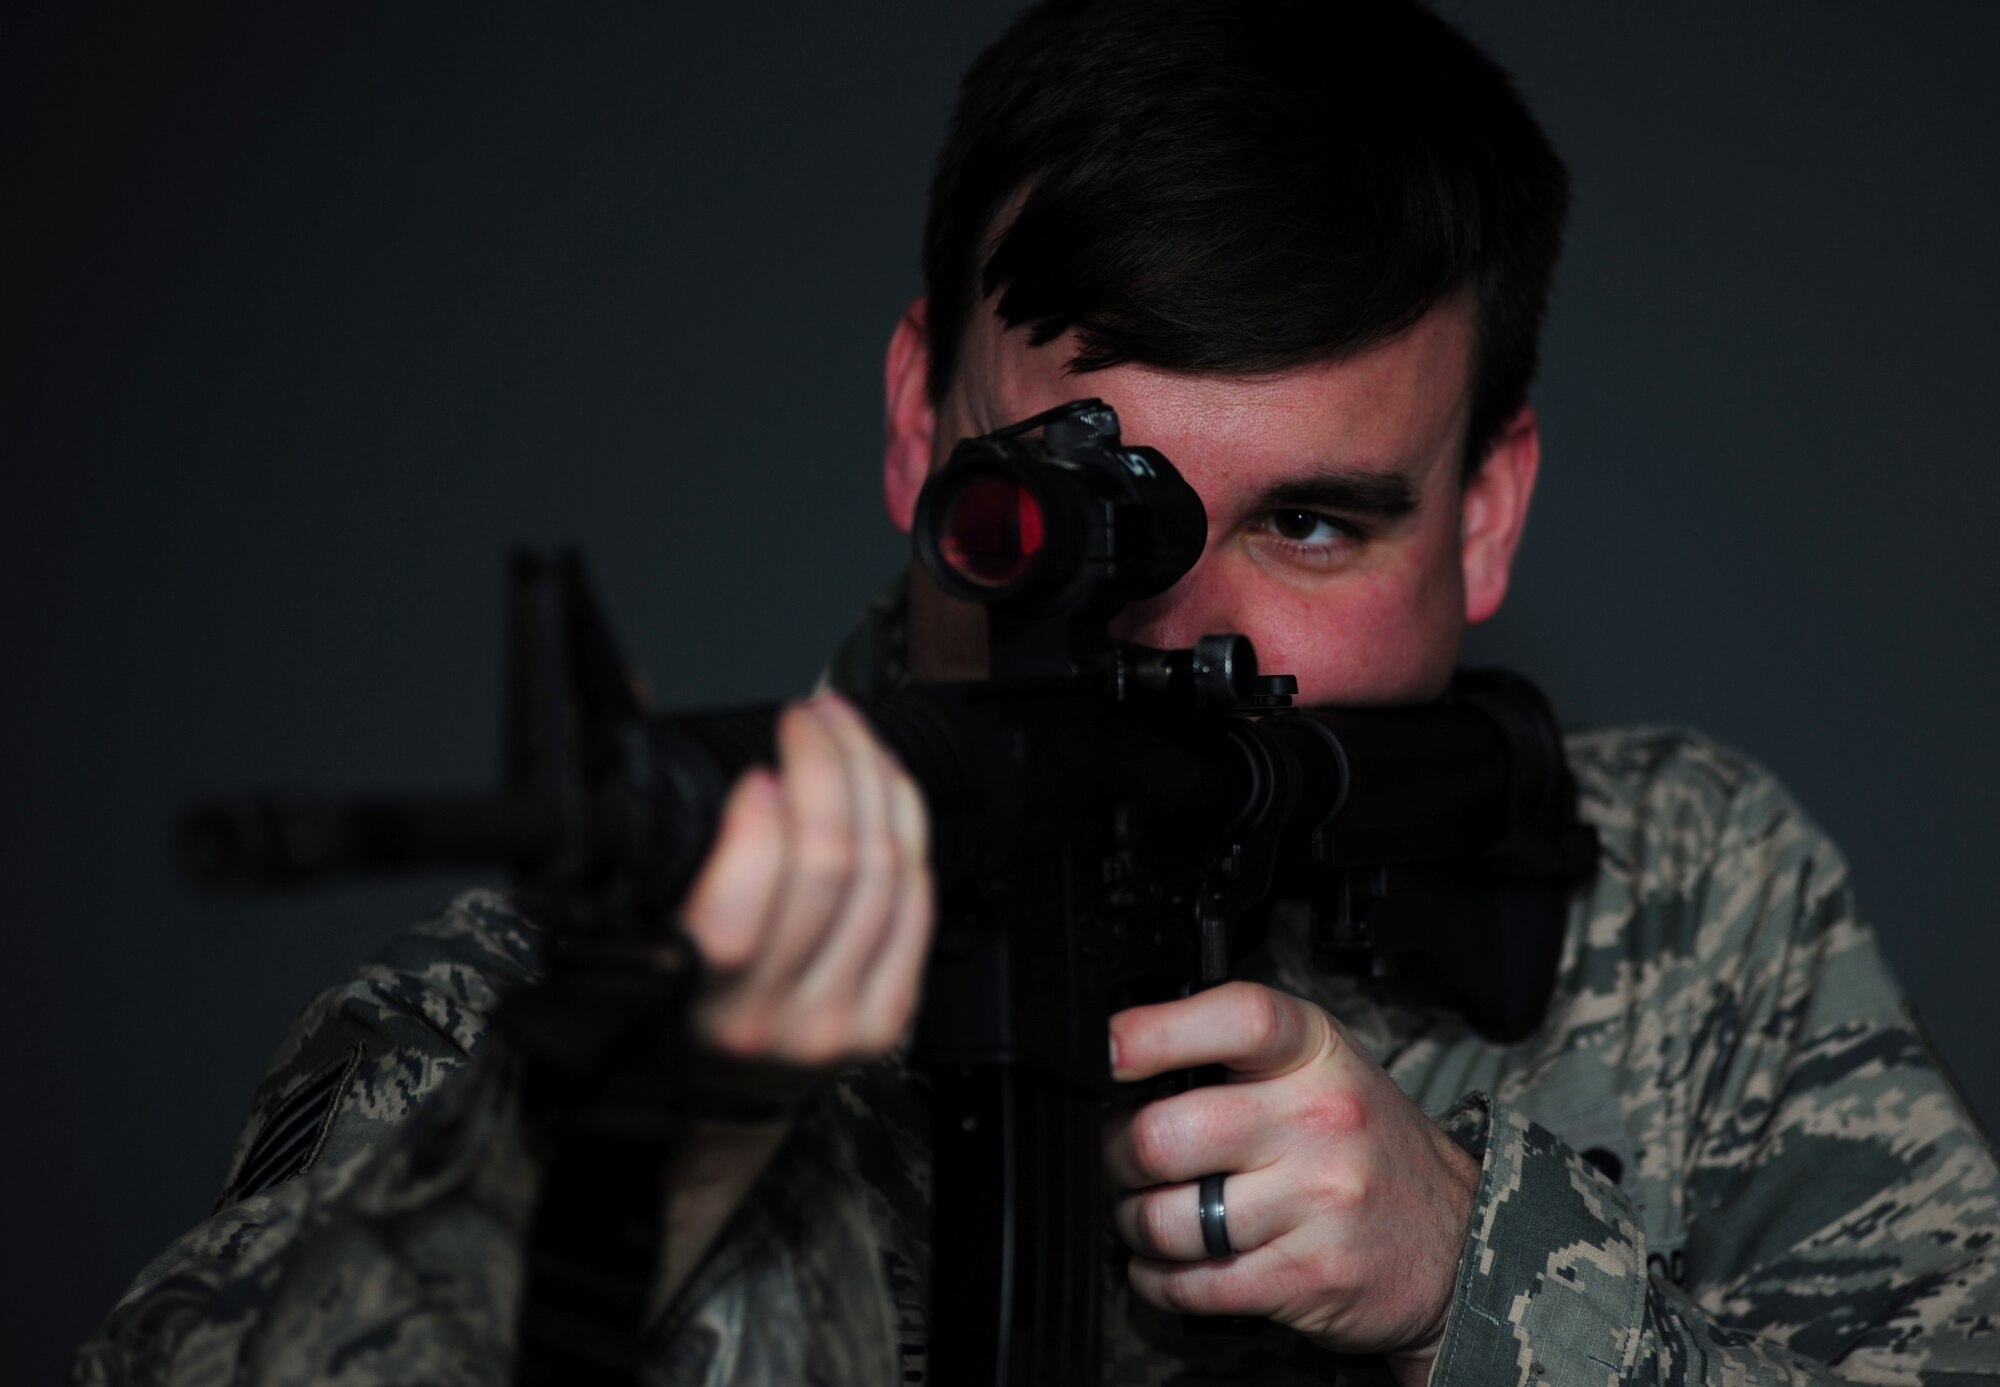 Staff Sgt. Ryan Gulley fires at a simulated target Jan. 26, 2015, at Joint Base Langley-Eustis, Va. The new firearms simulator allows Airmen to gain real-world knowledge and experience through projections of real-life scenarios. Gulley is a 633rd Security Forces Squadron training instructor. (U.S. Air Force photo/Airman 1st Class Areca T. Wilson)